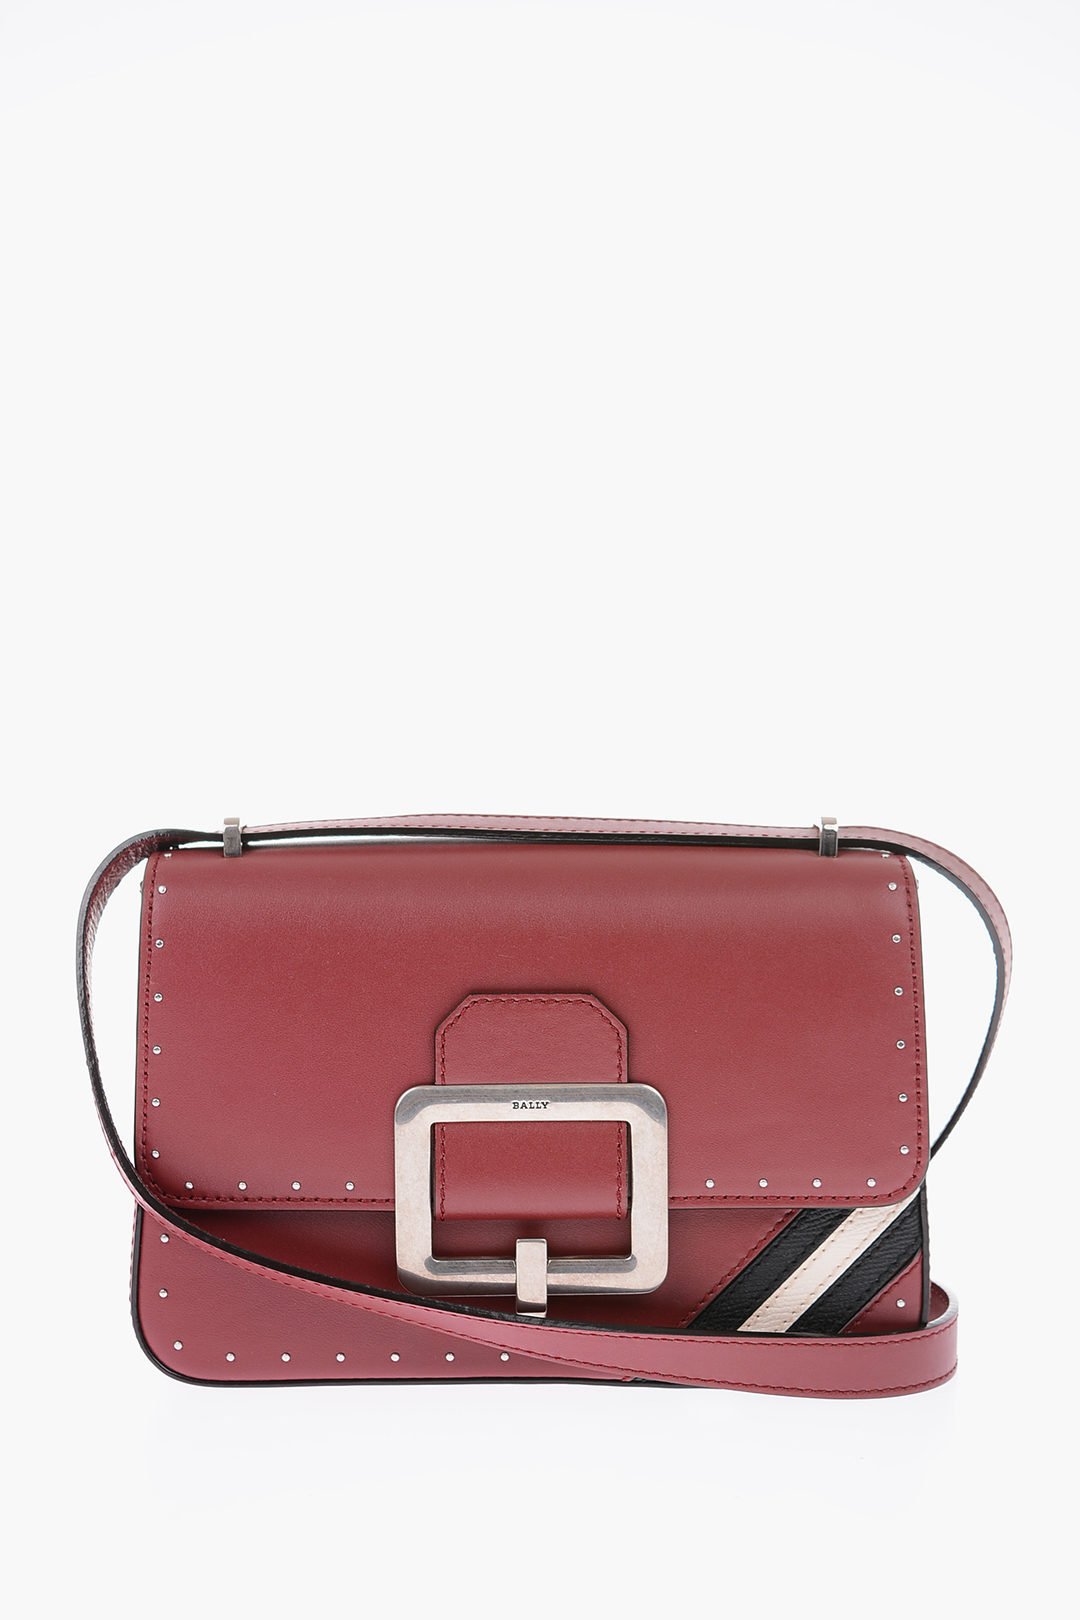 Cross body bags Bally - Janelle leather bag - 622798725